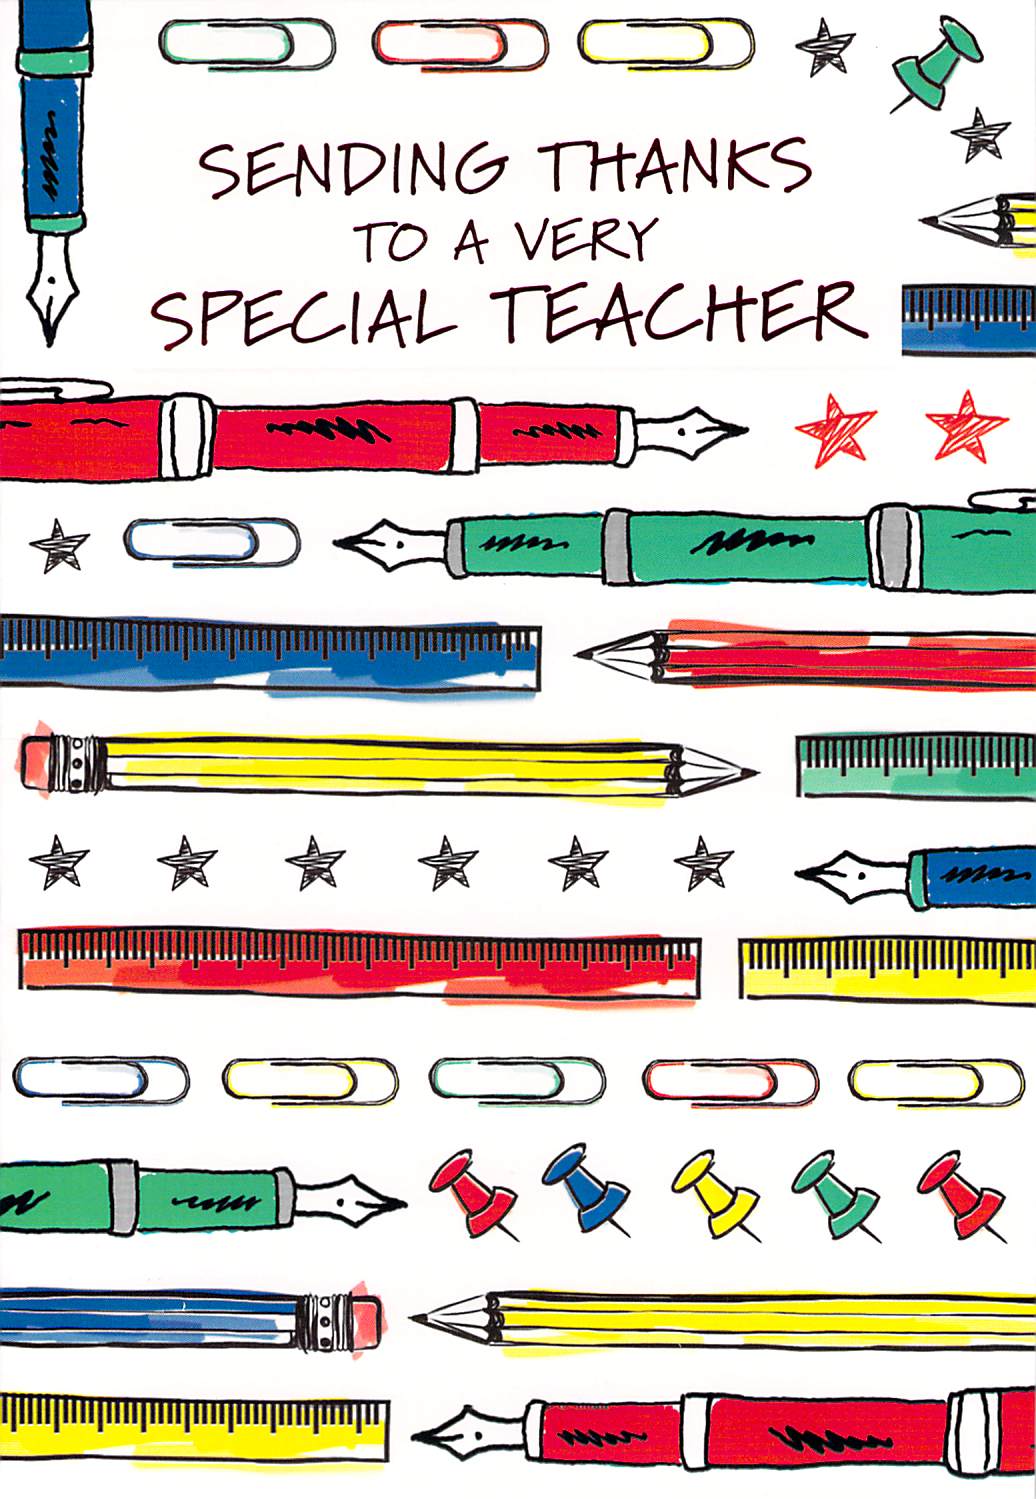 Thank You Teacher - Pens / Stationary - Greeting Card - Free Postage